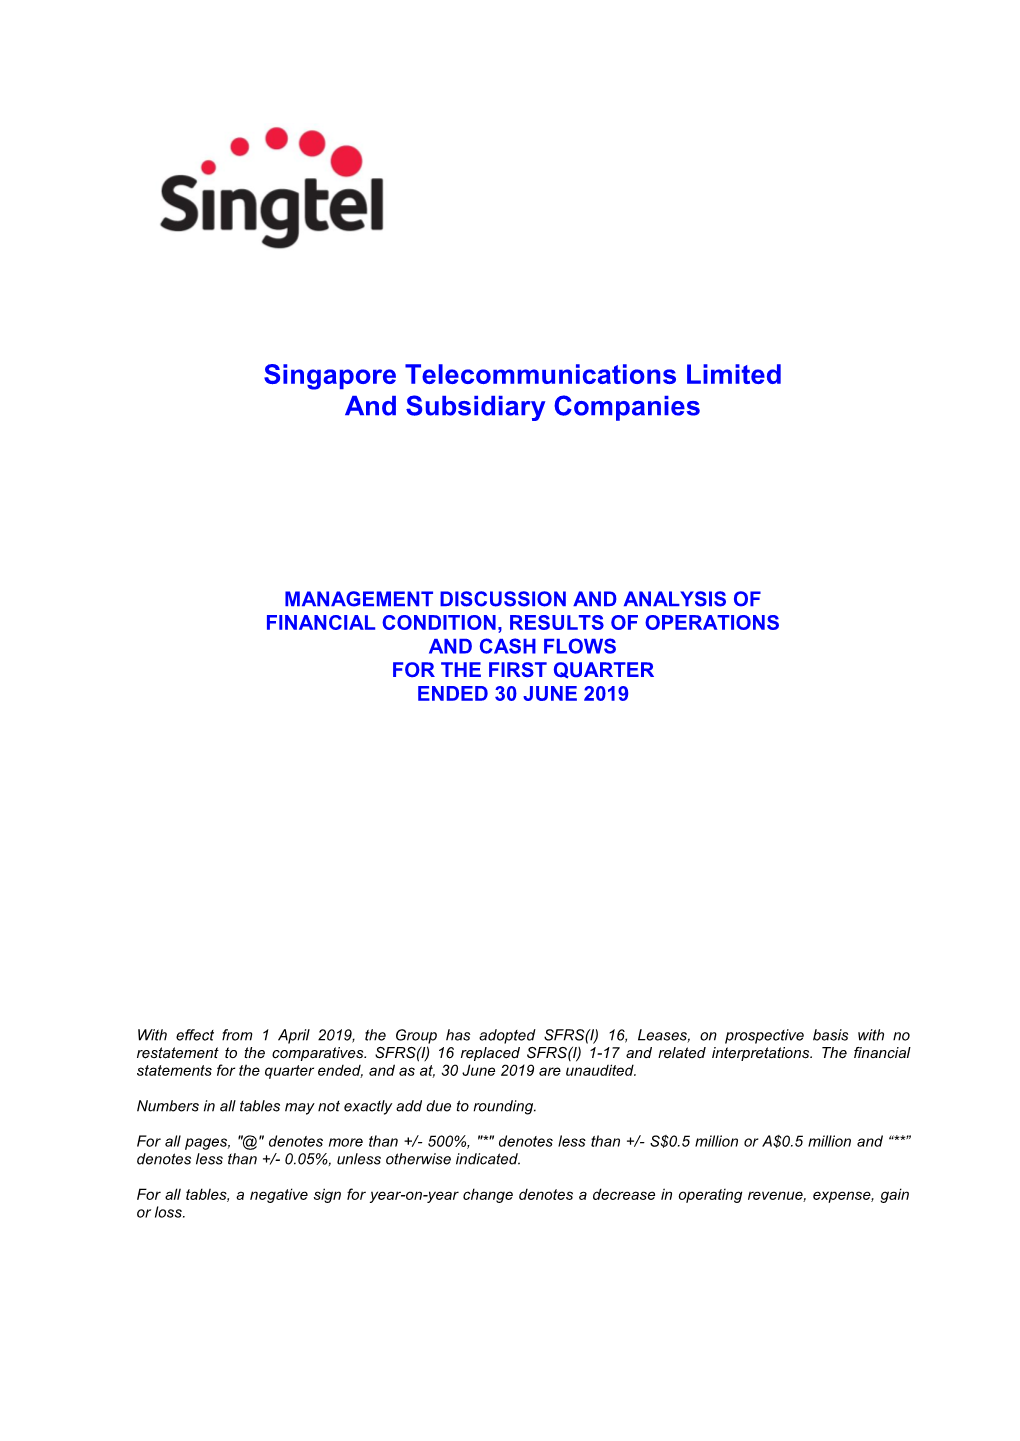 Singapore Telecommunications Limited and Subsidiary Companies